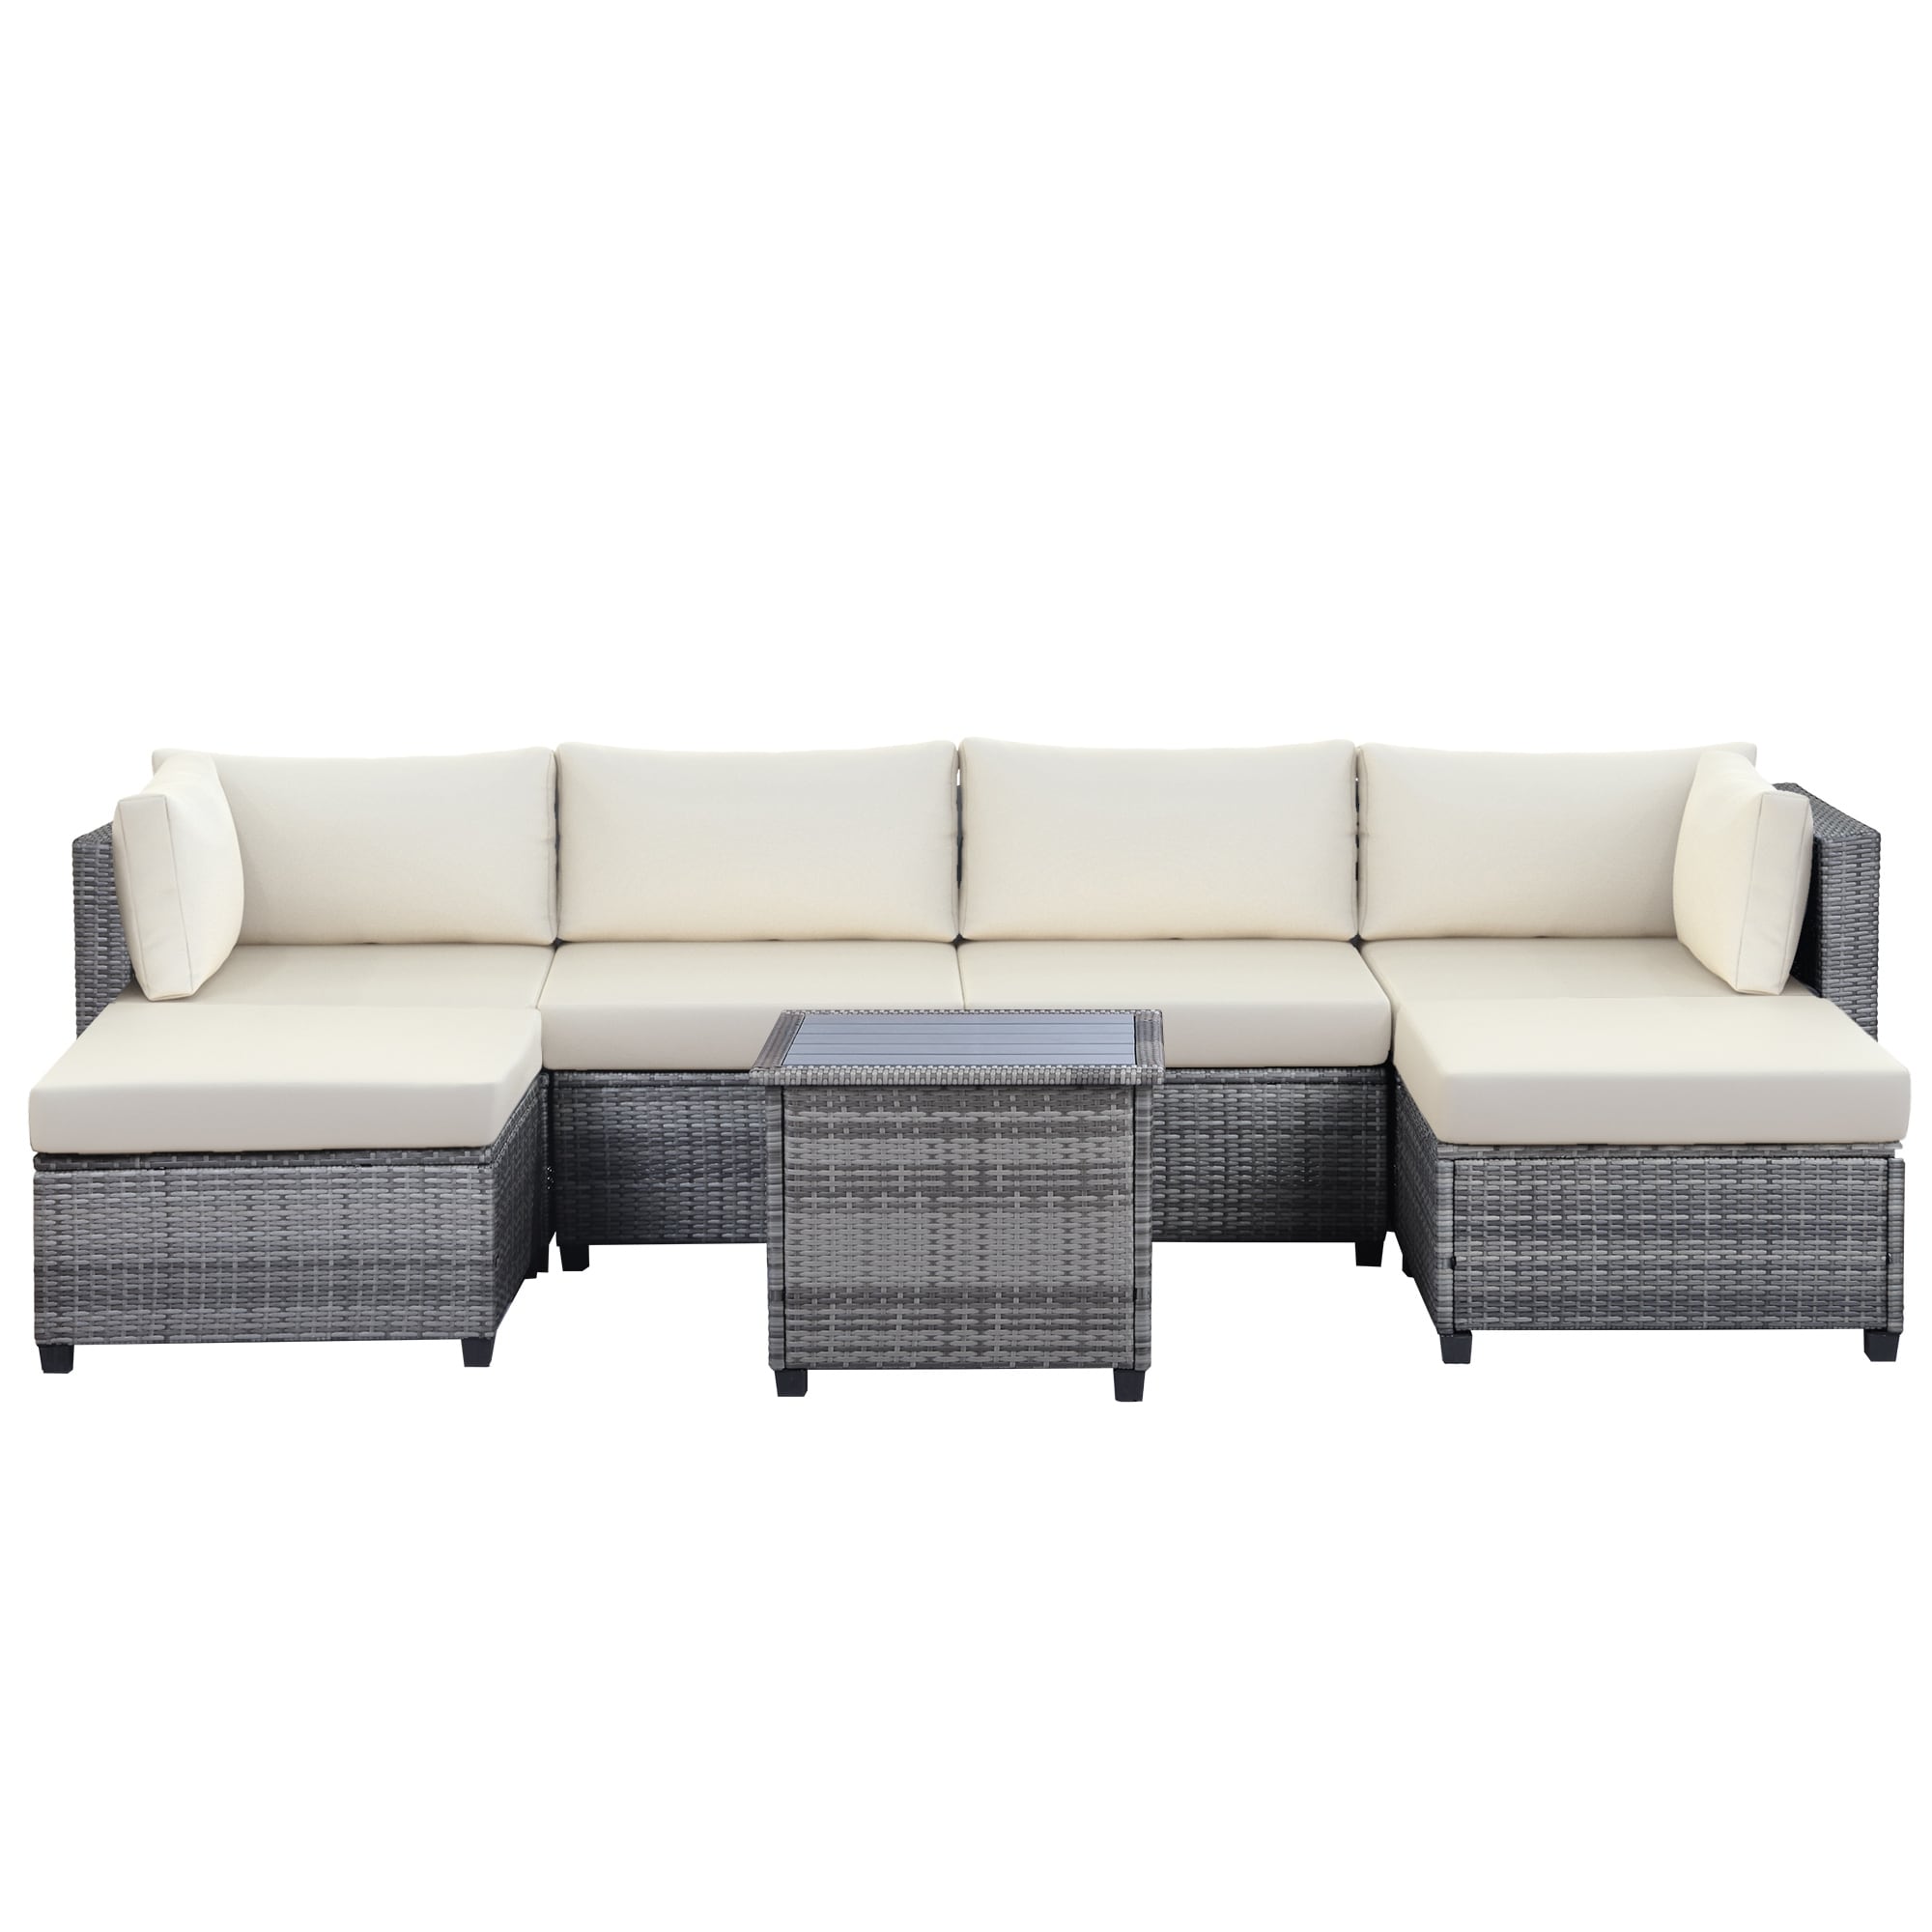 7 Piece Rattan Sectional Seating Group With Cushion